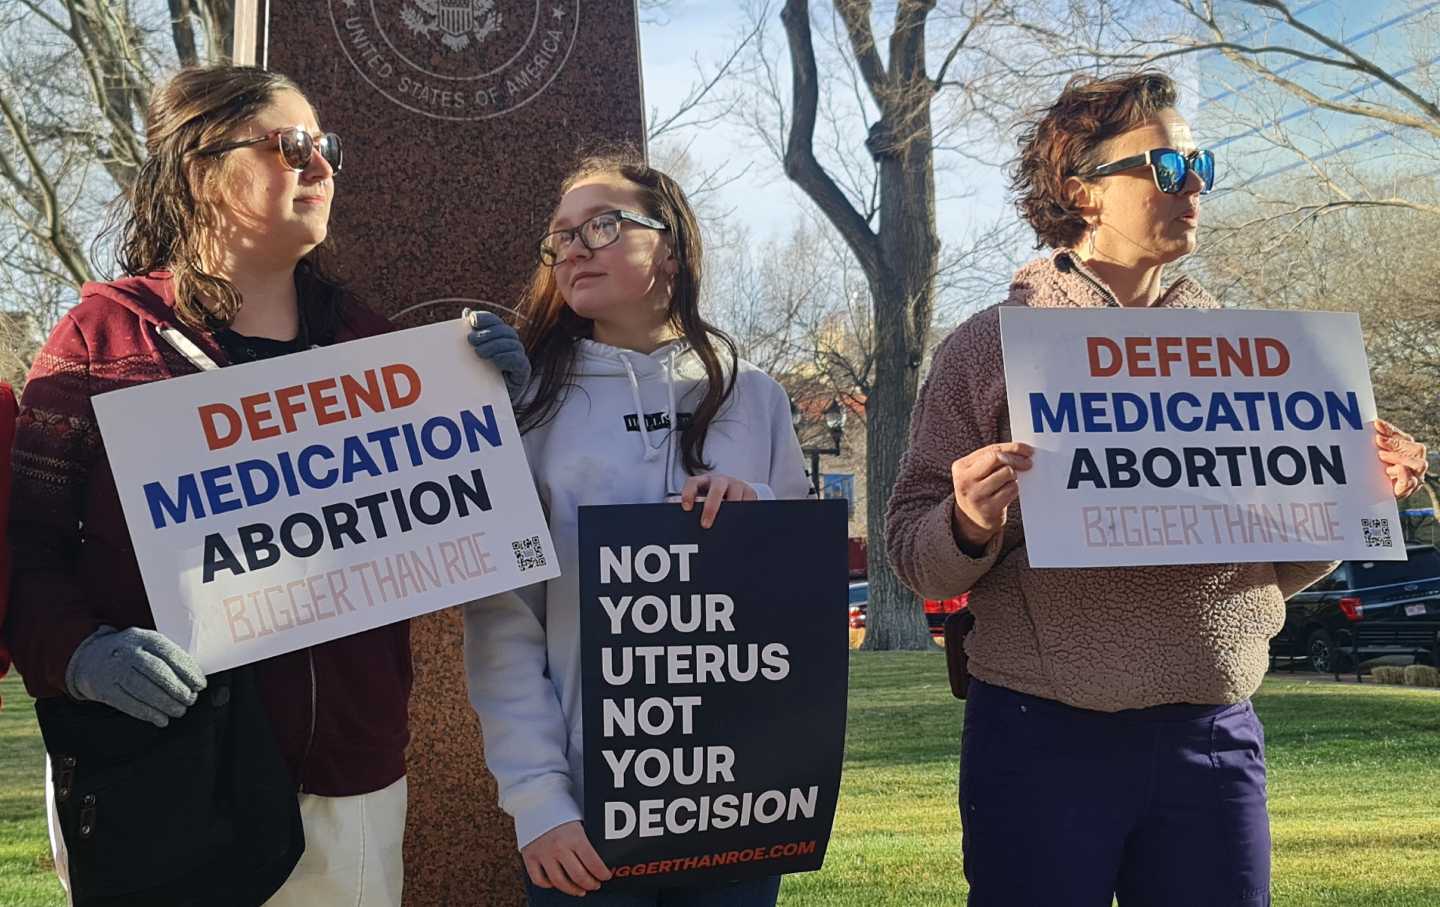 A Conservative Christian Judge Rules Against Medication Abortion. How Hard  Will Democrats Fight Back? | The Nation